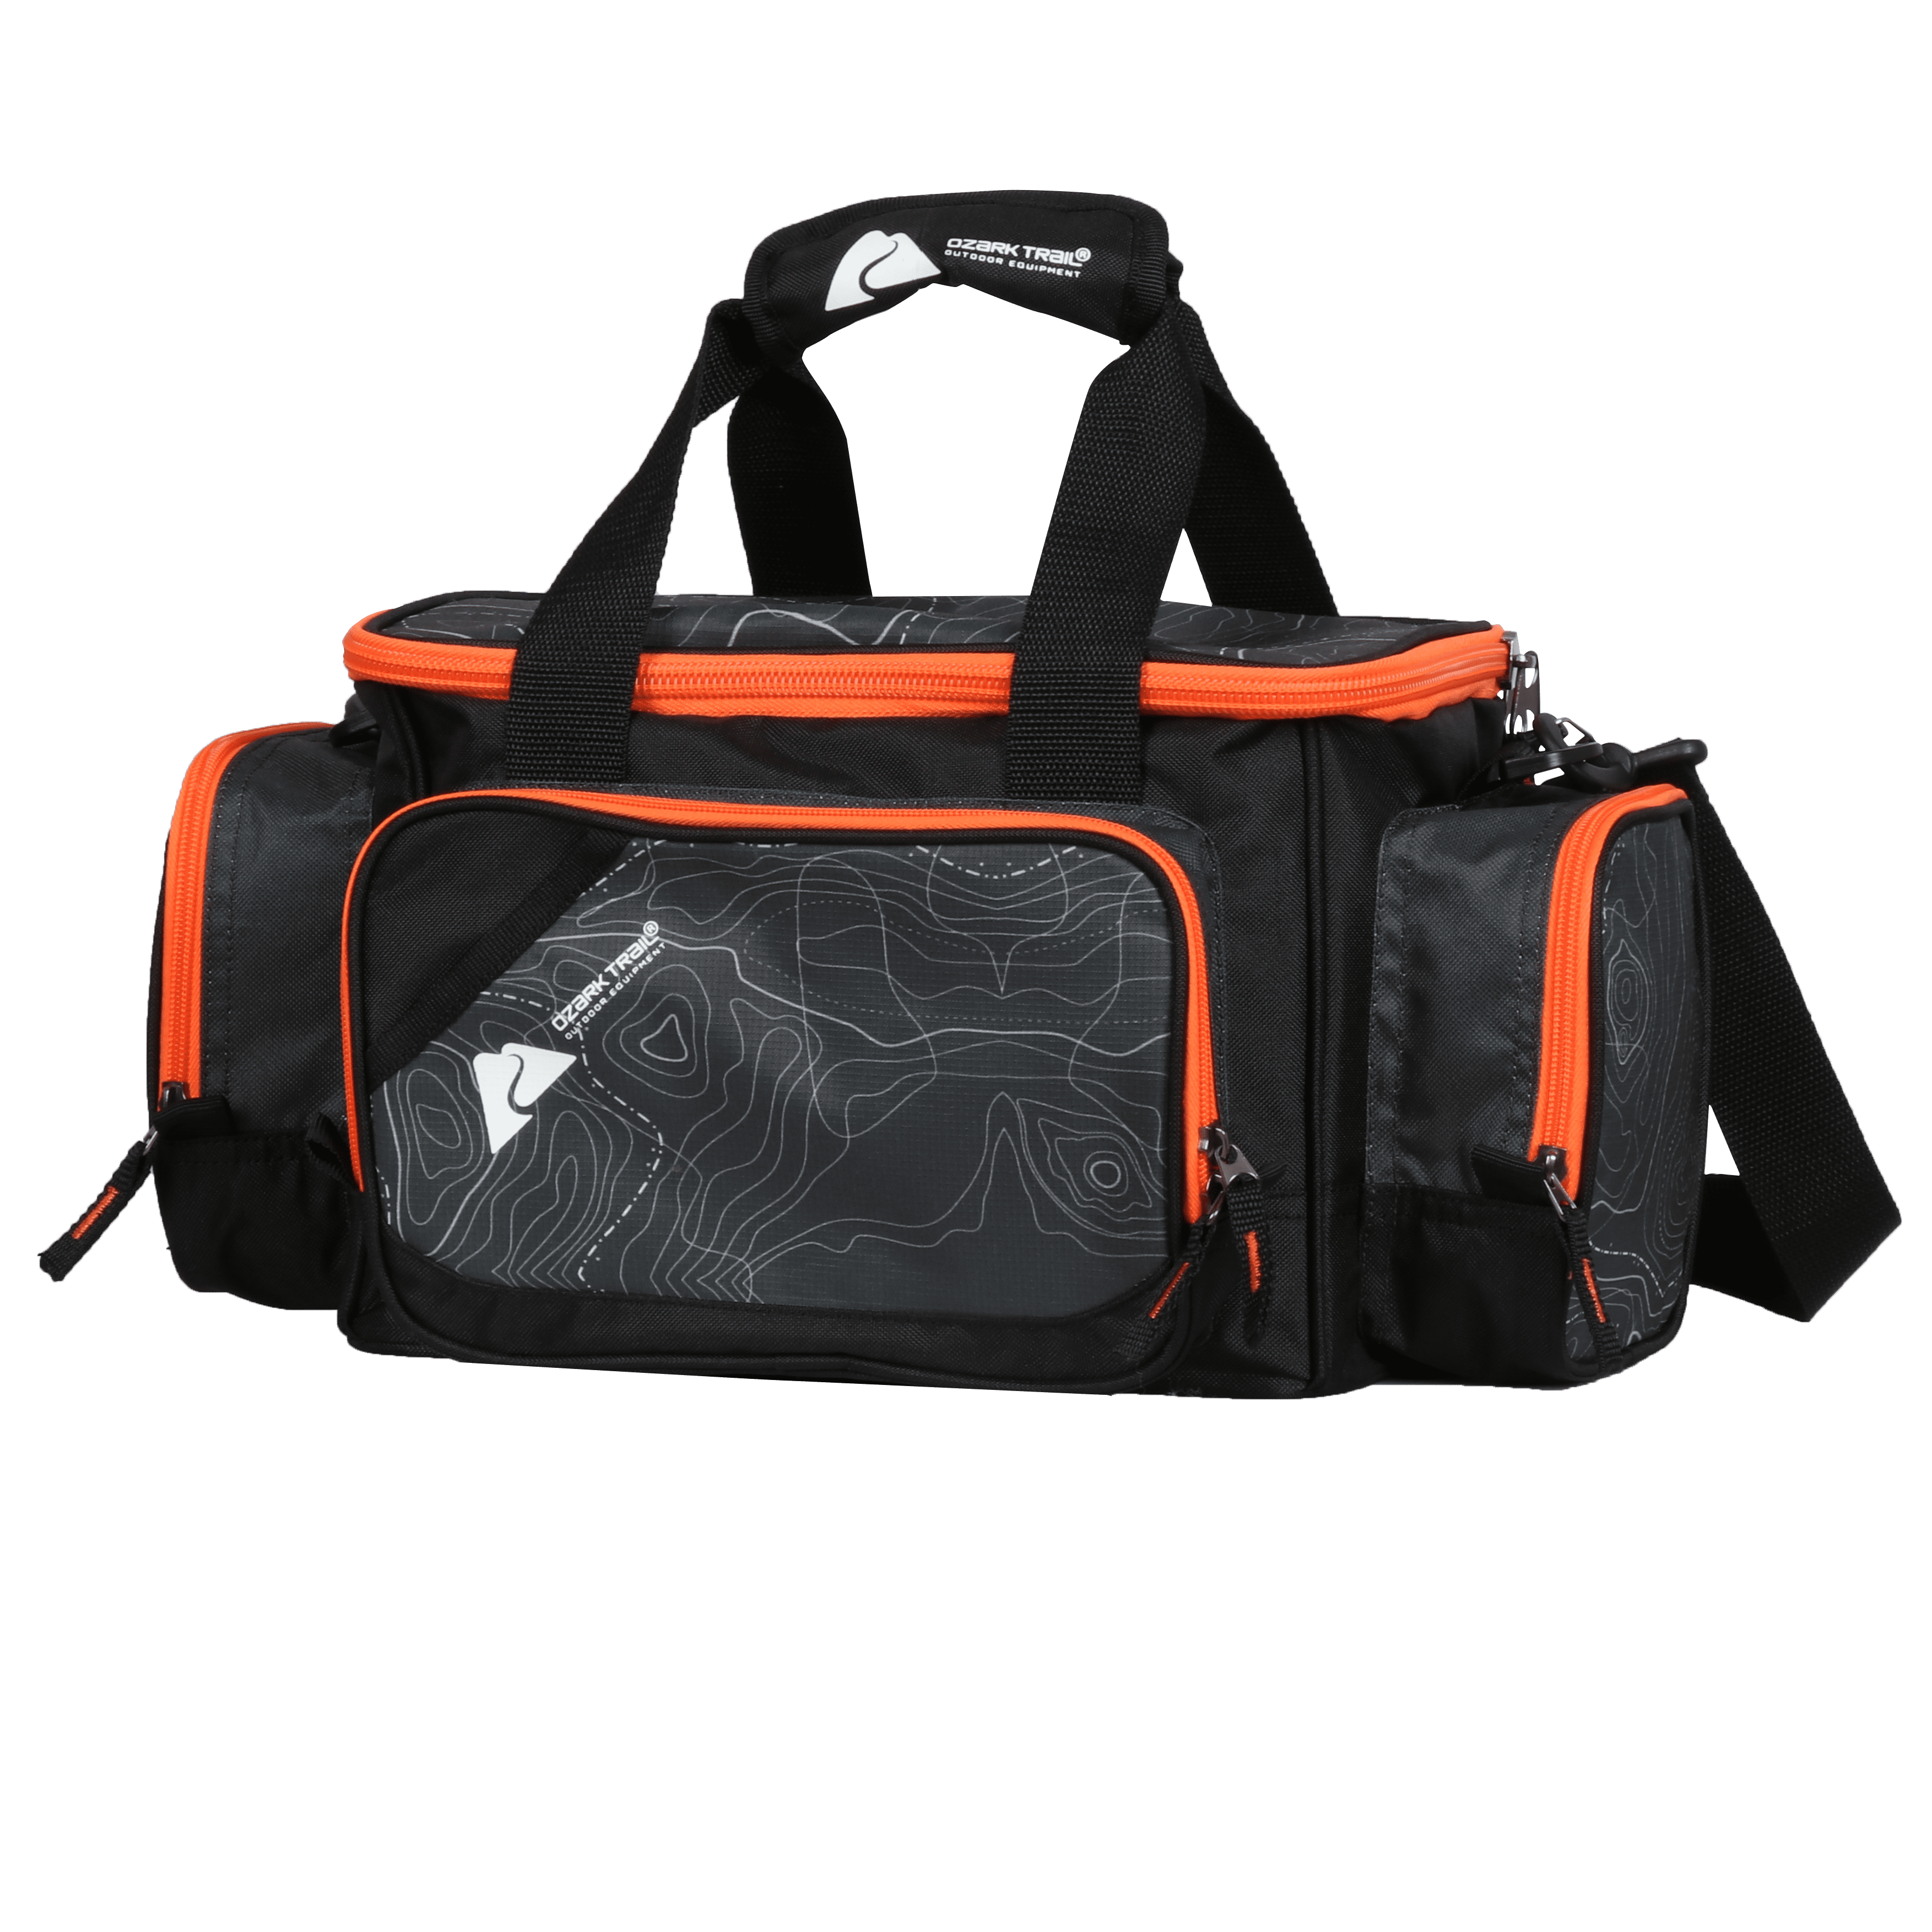 Okeechobee Fats Small Soft-Sided Fishing Tackle Bag with 2 Medium Utility Lure B 